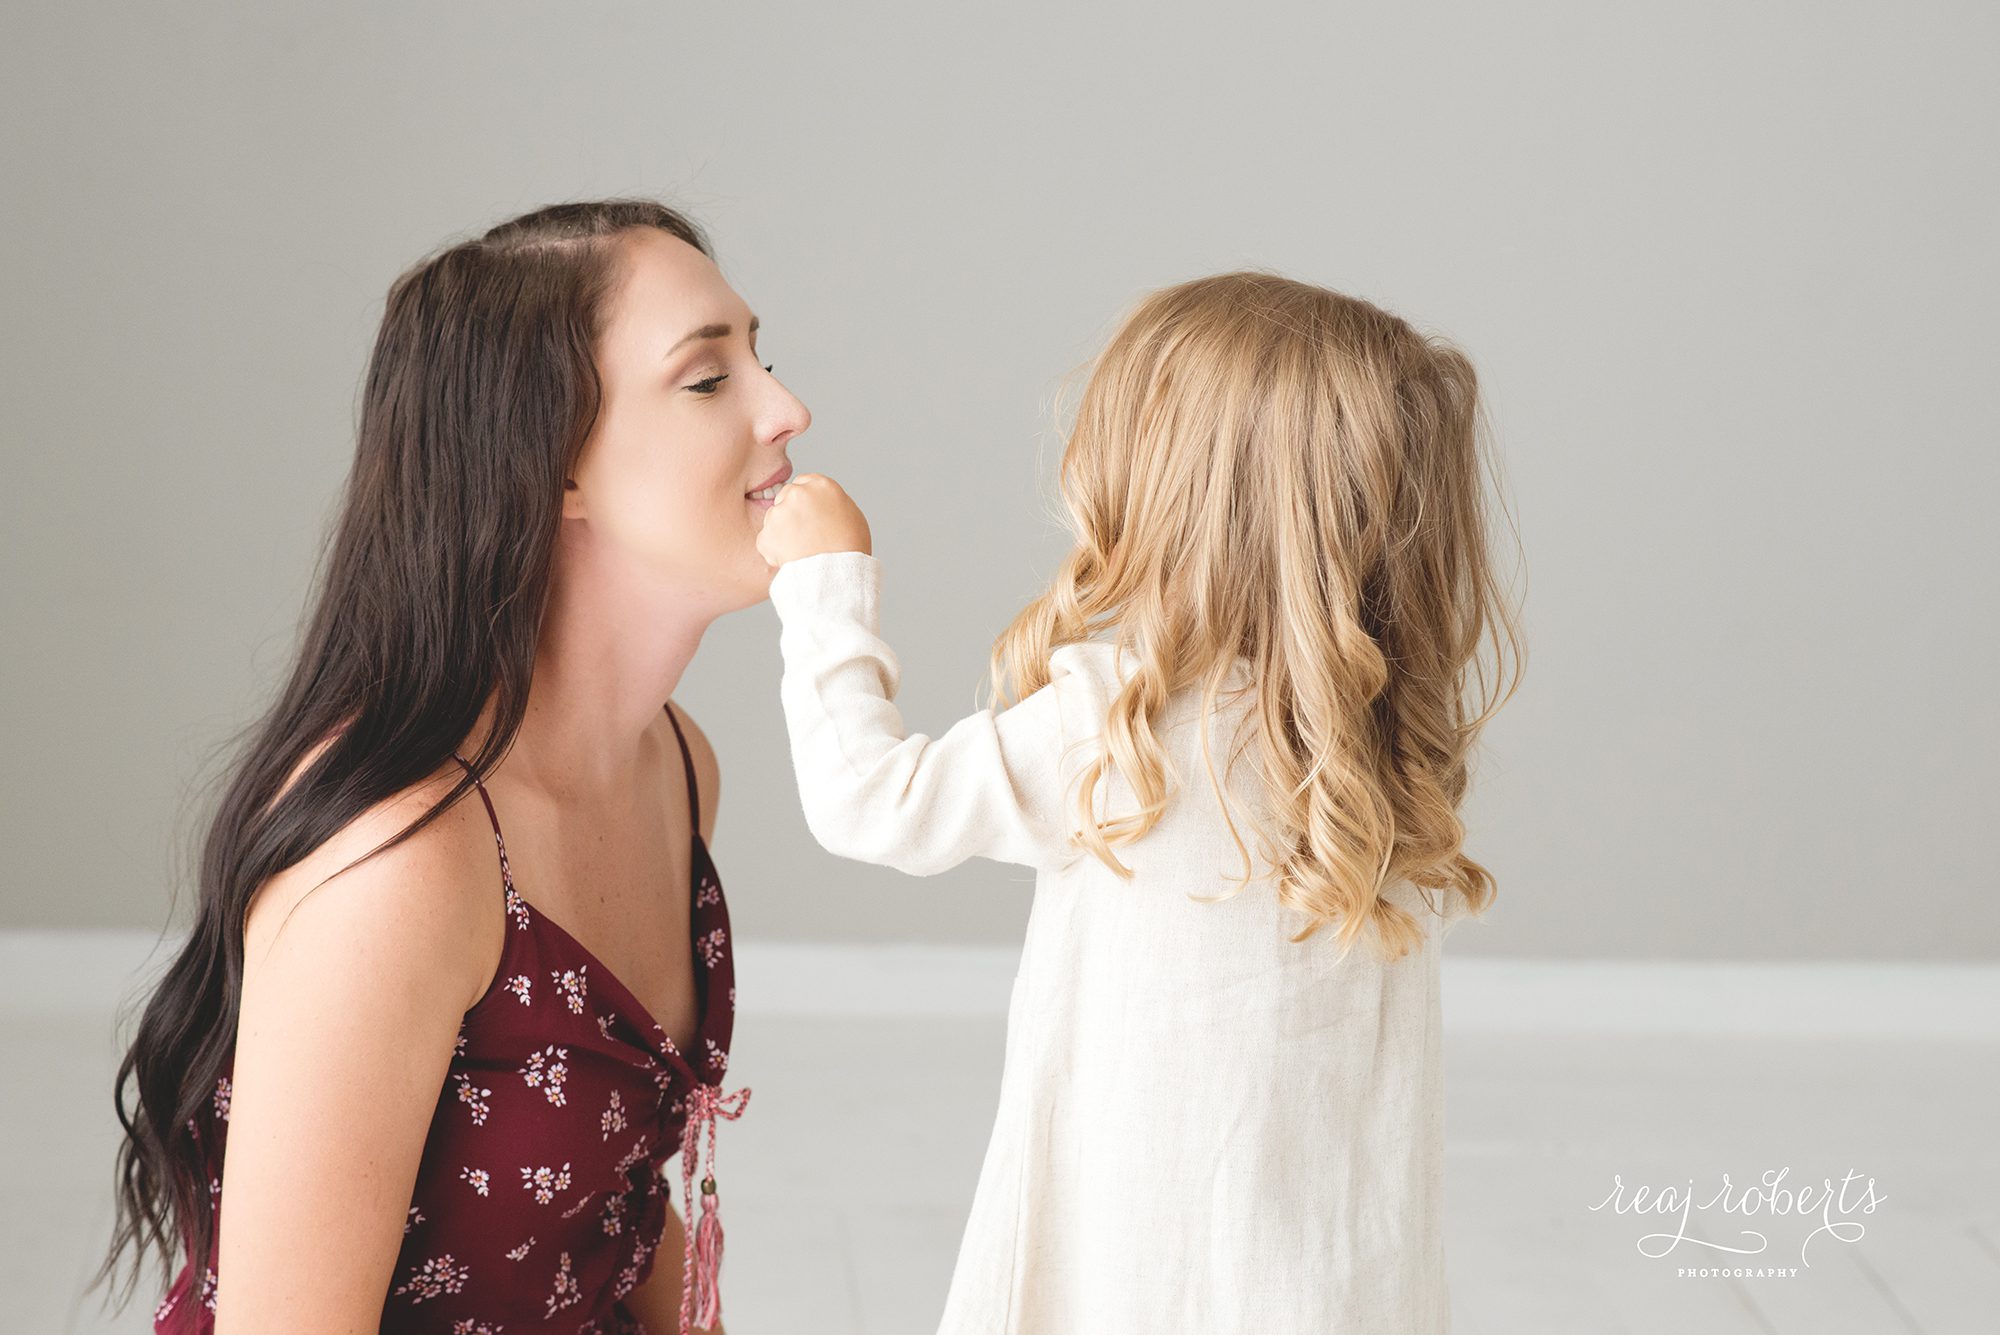 Chandler Family Photography | Reaj Roberts Photography